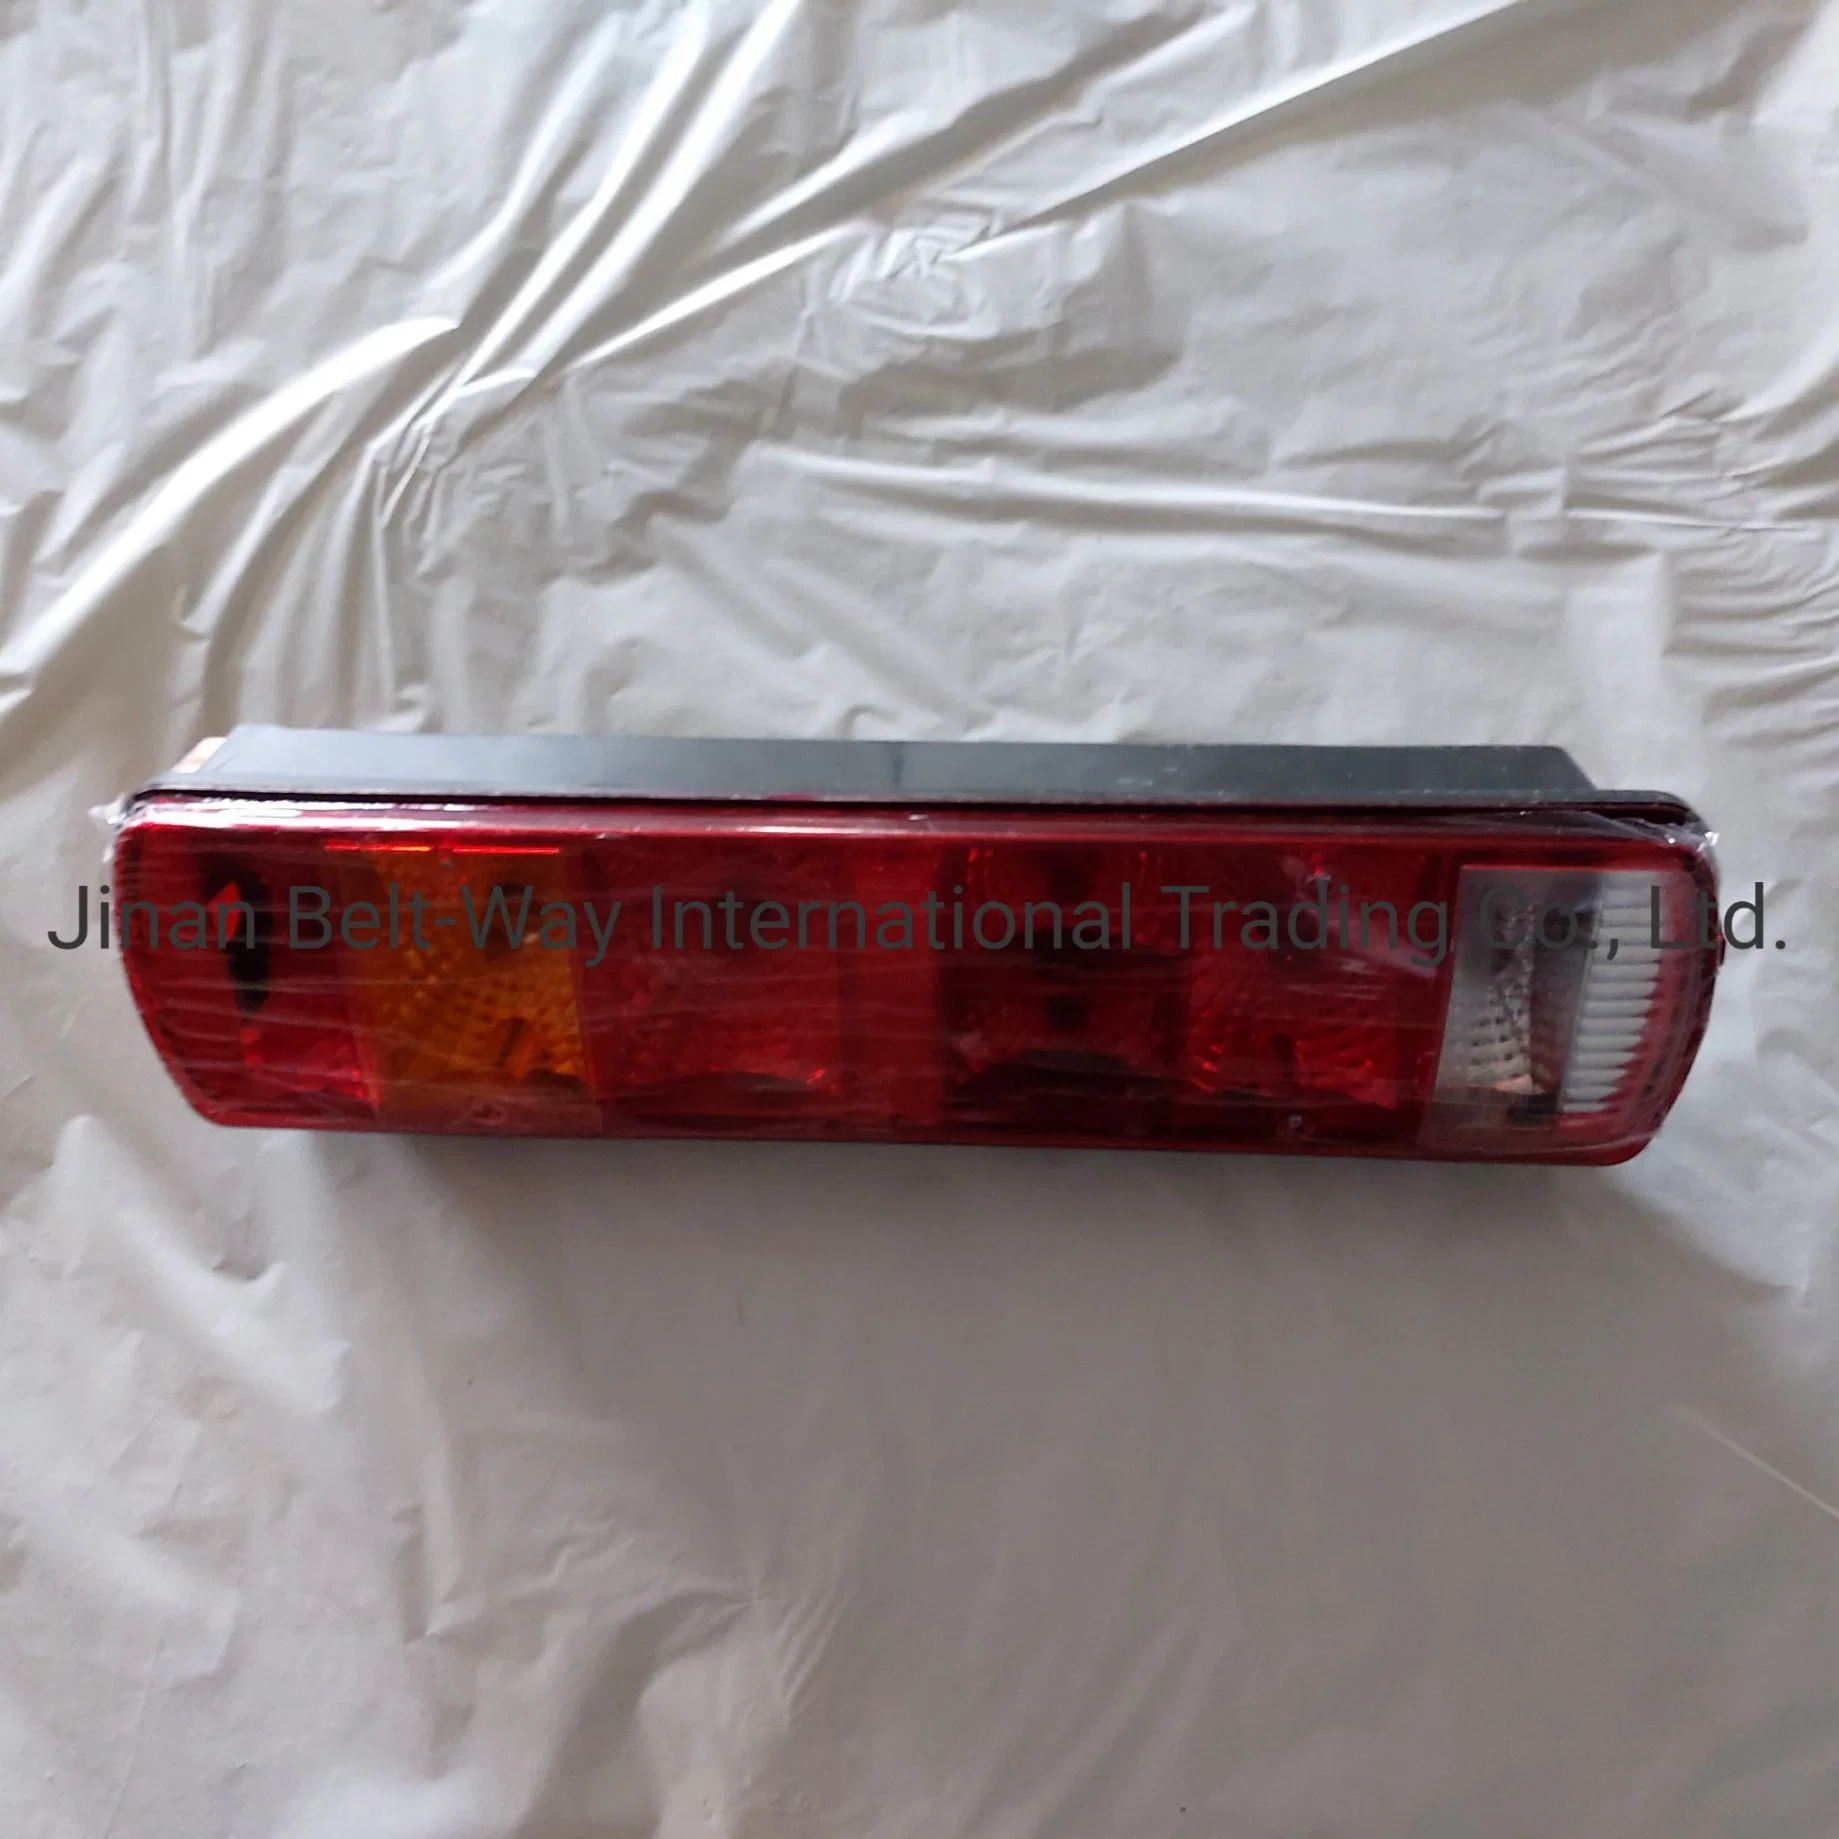 Sinotruk HOWO Truck Parts Truck Spare Parts Rear Lamp Wg9719810011